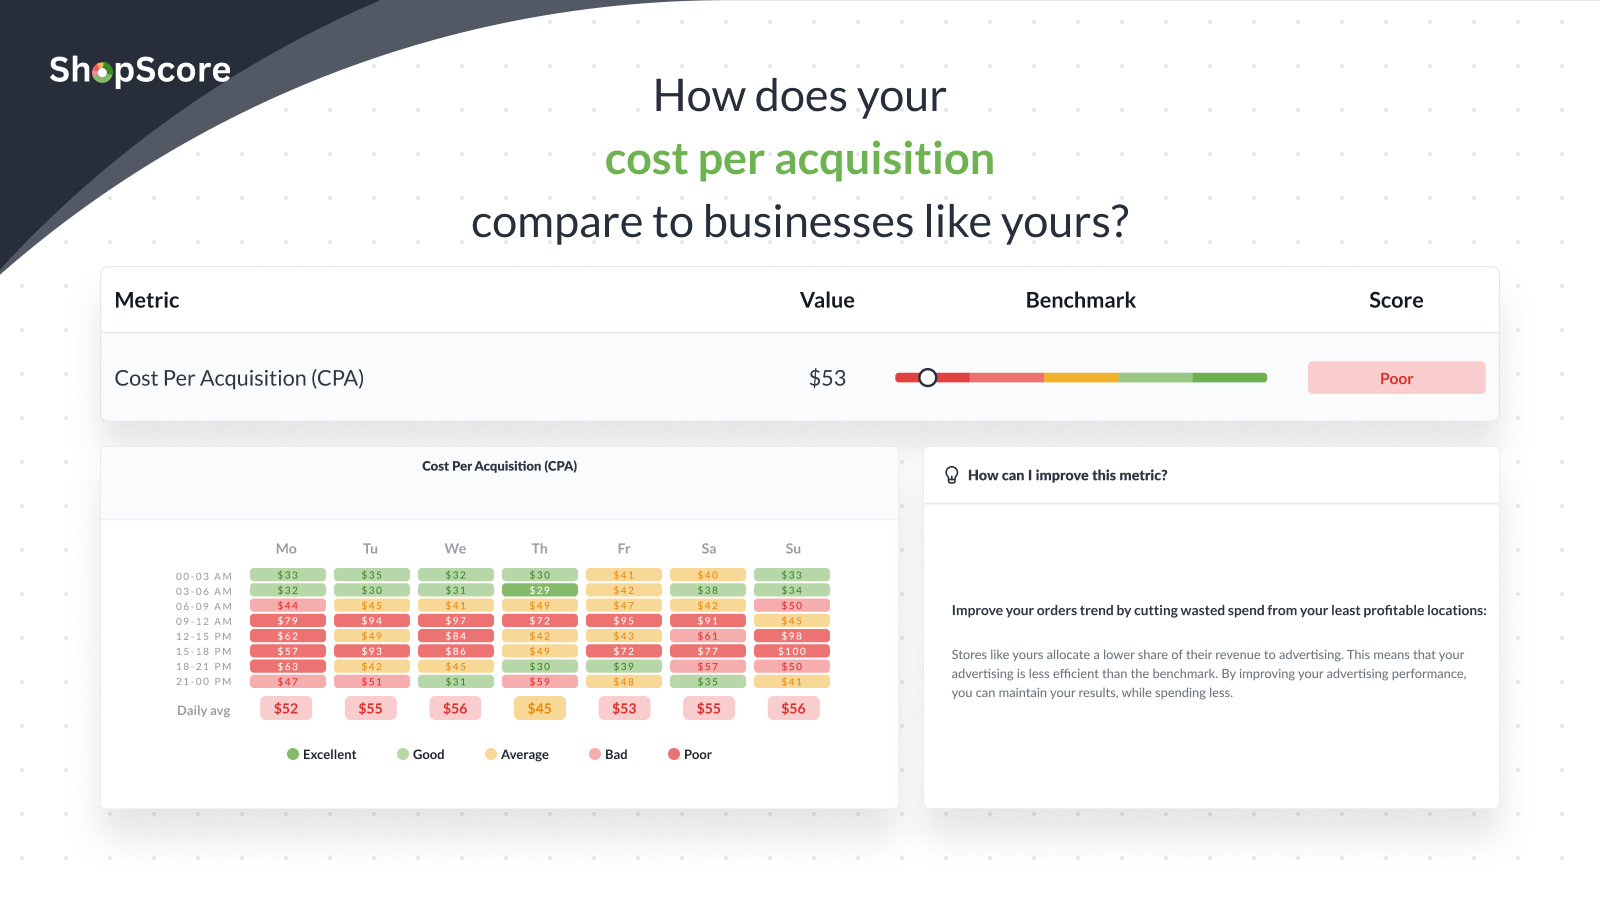 Compare your cost per acquisition to your competitors